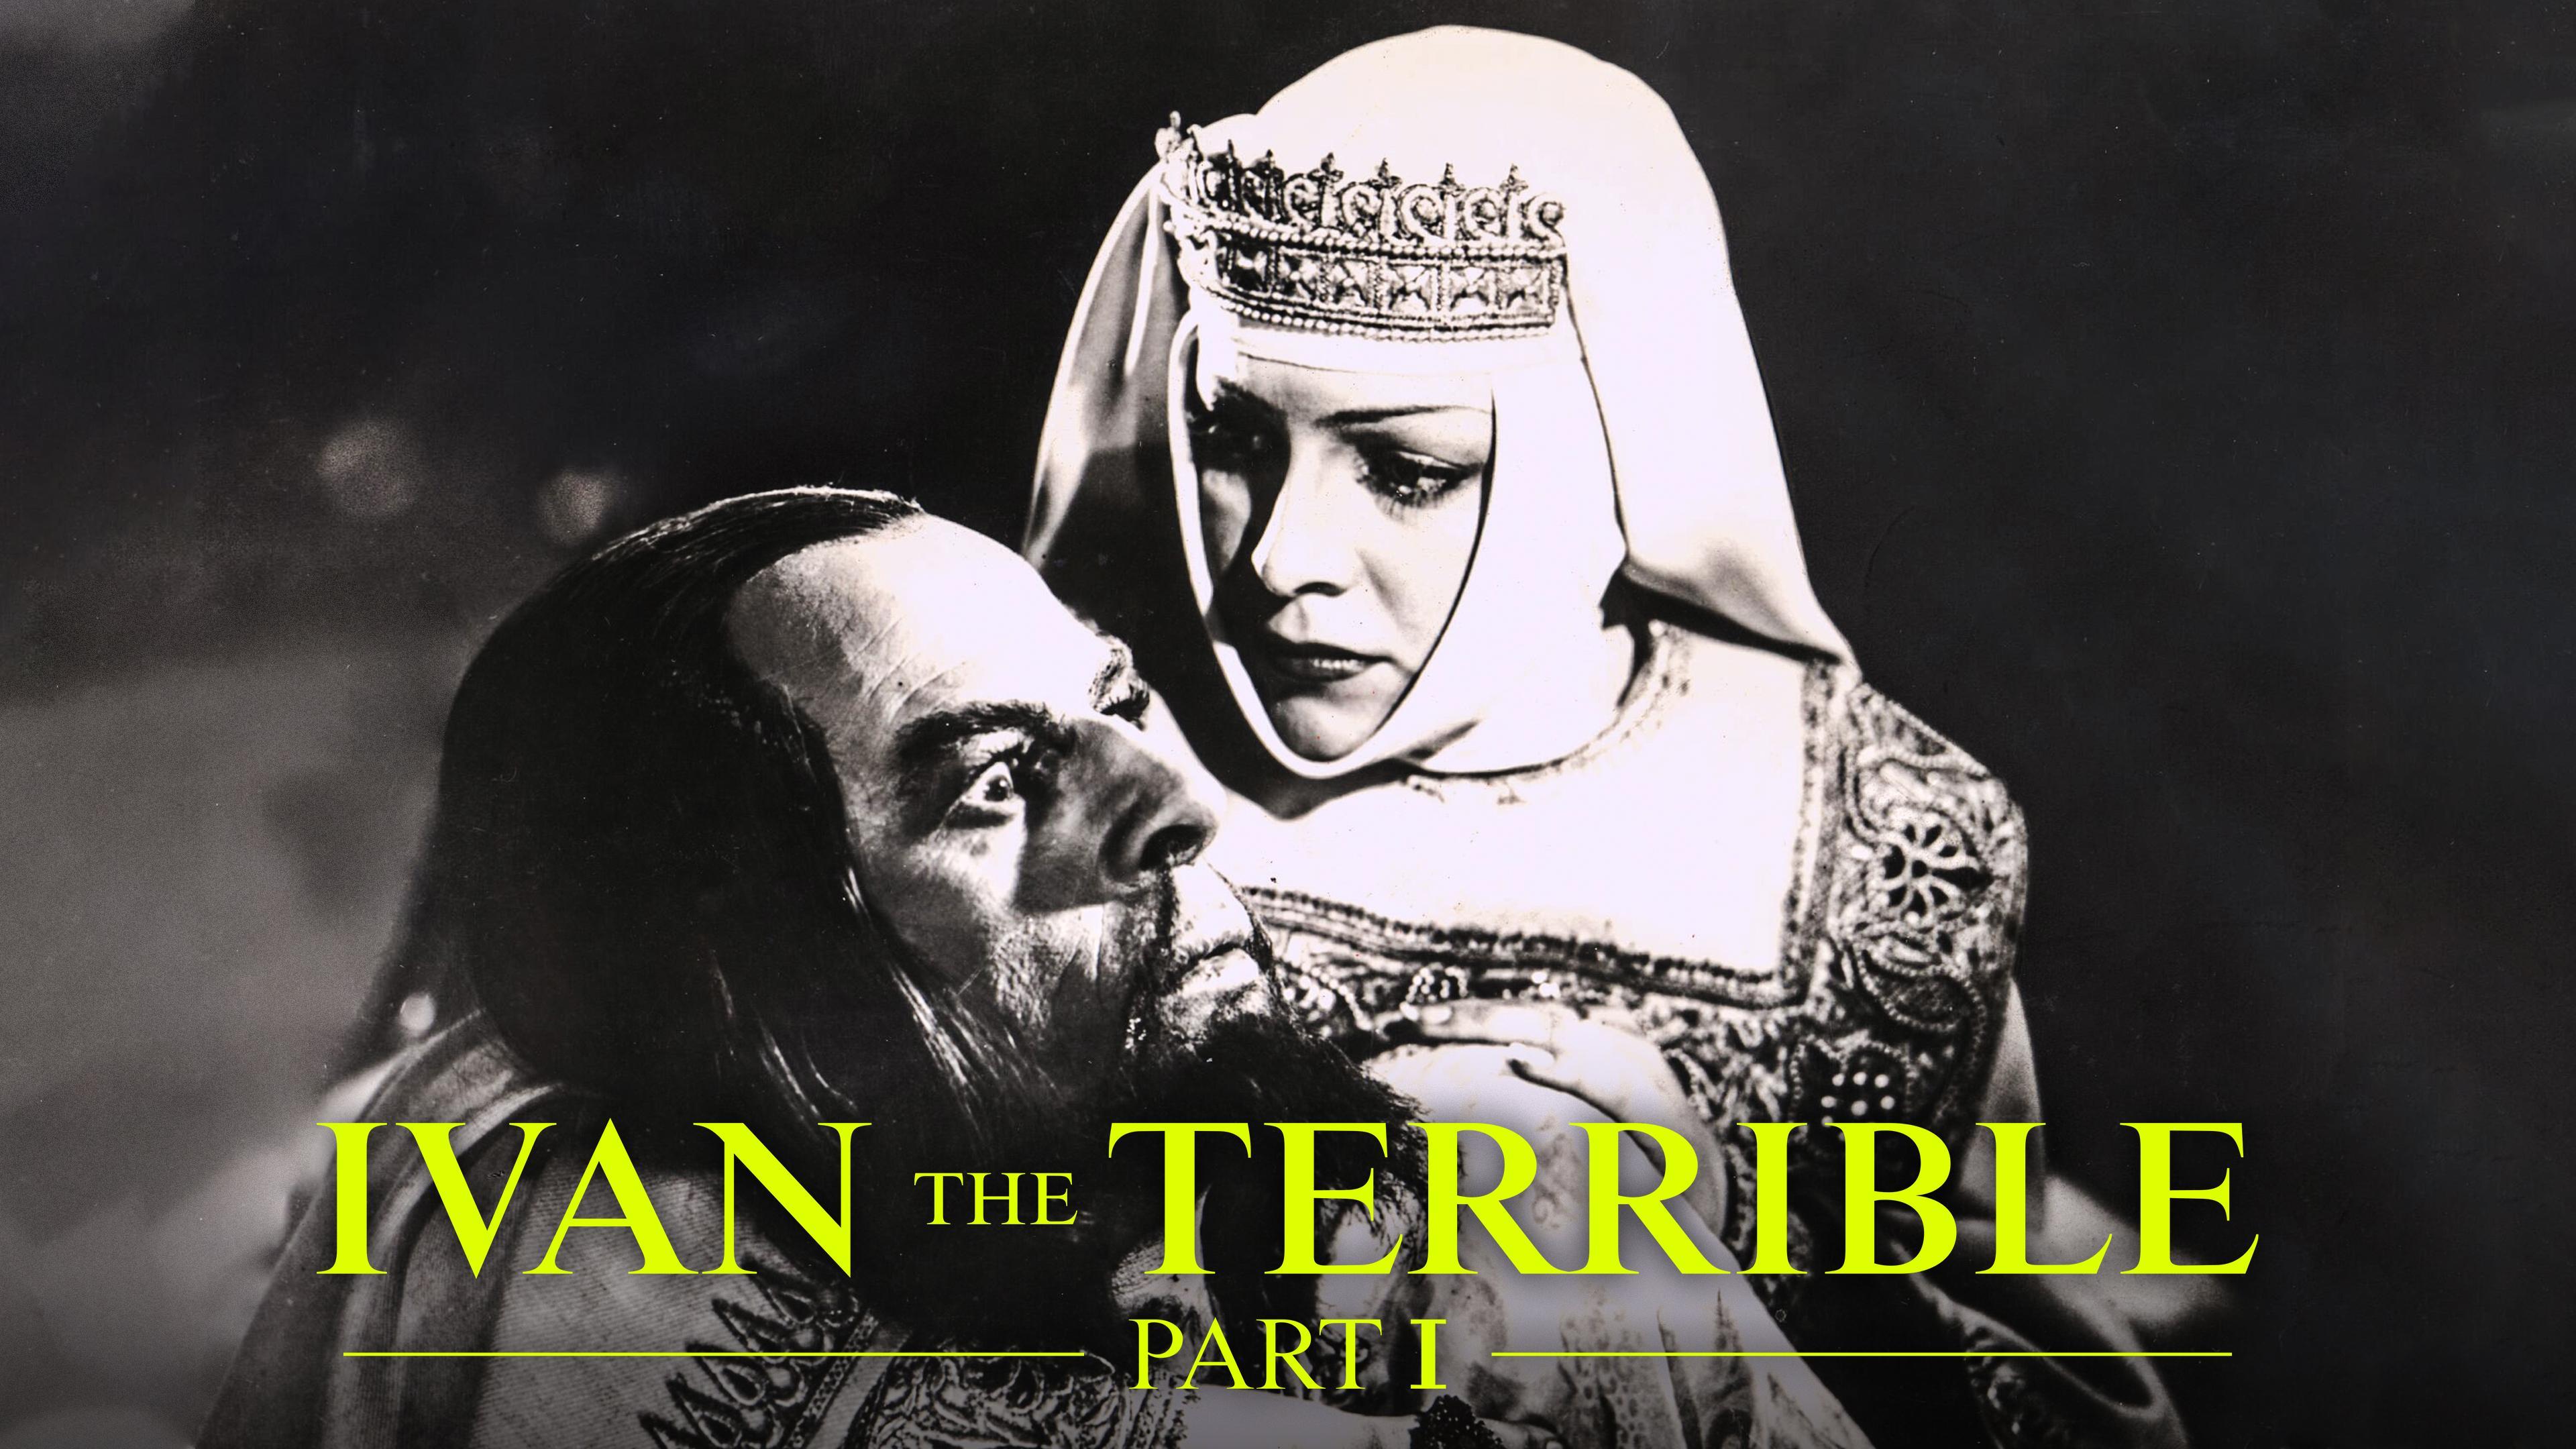 46-facts-about-the-movie-ivan-the-terrible